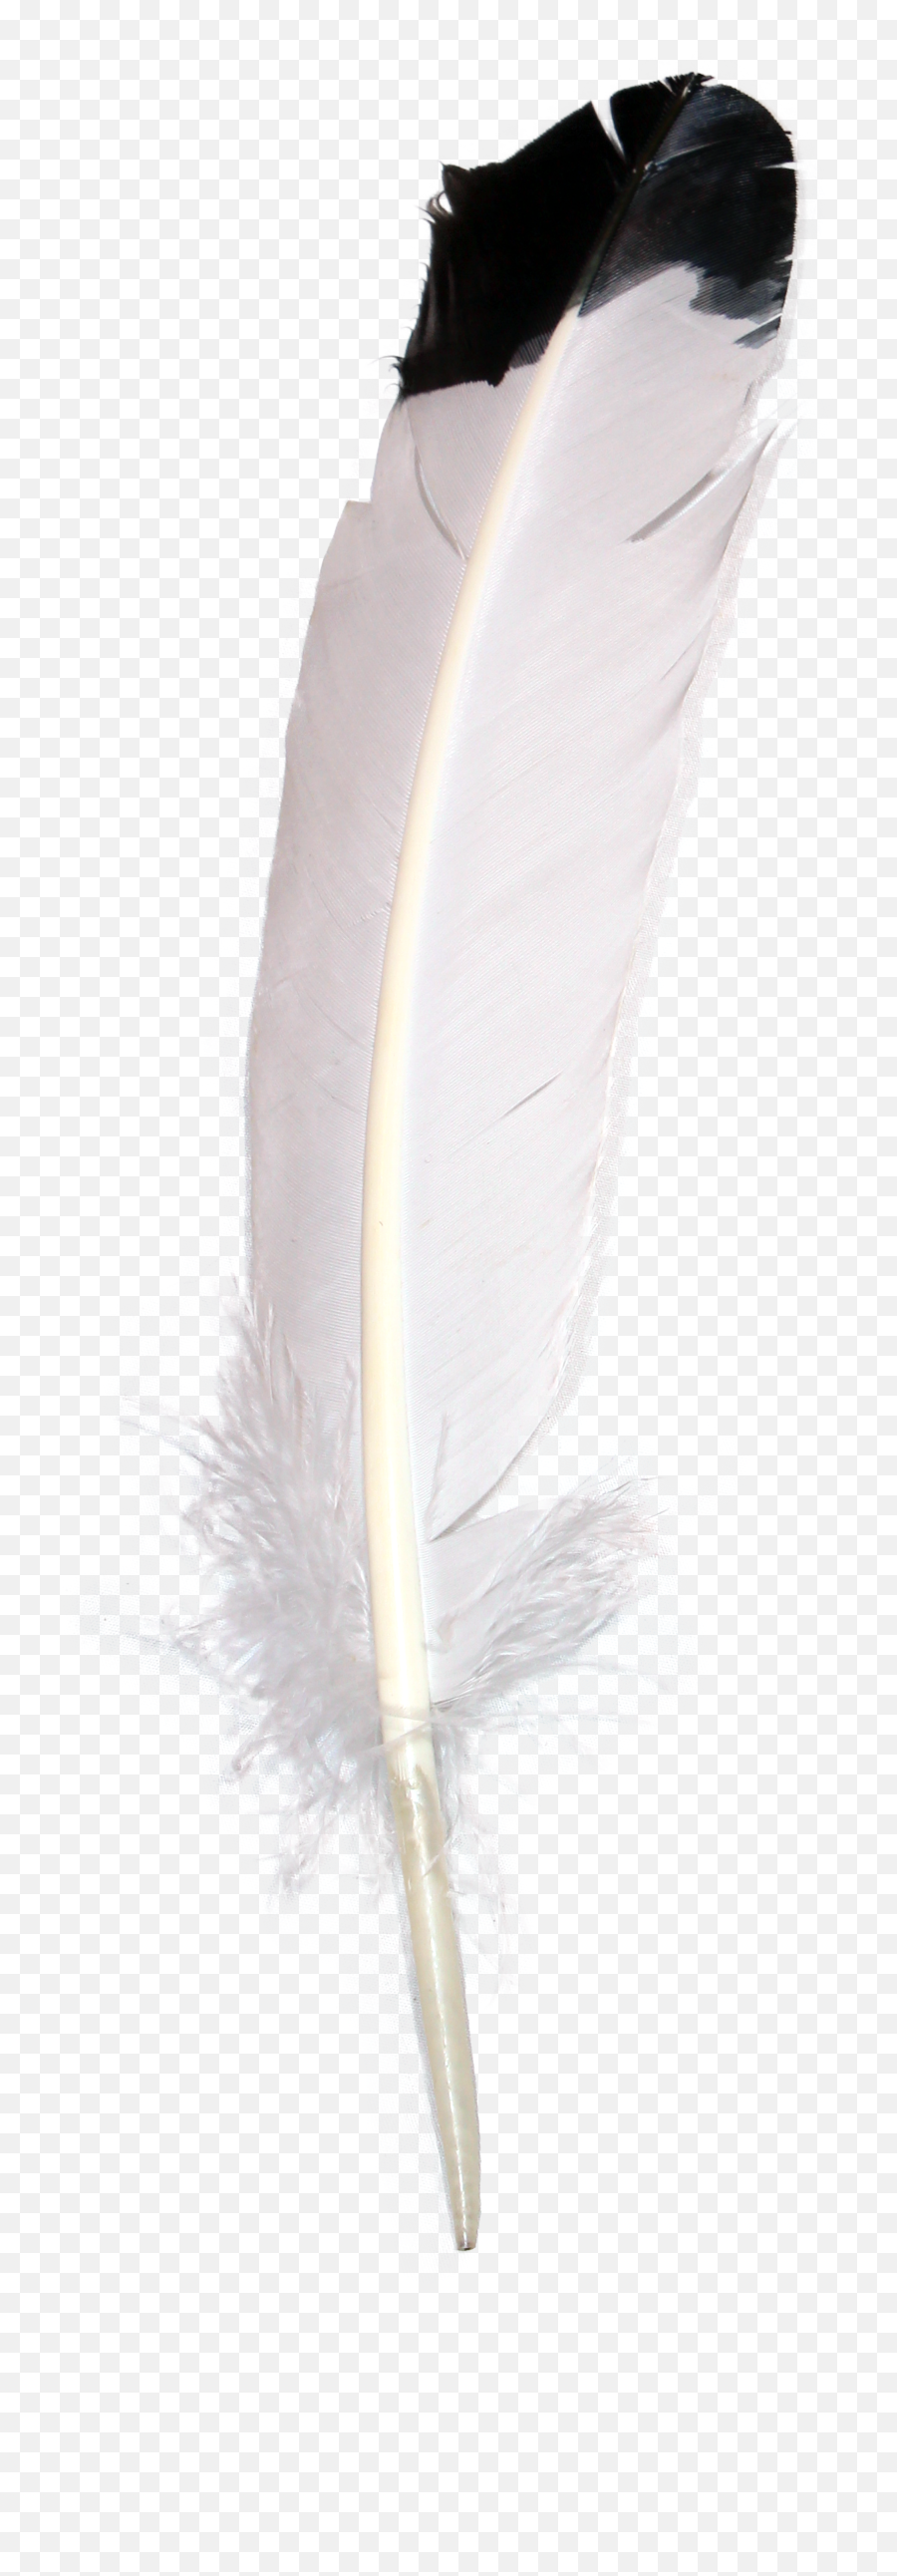 Mighty Feathers Mini - Experiment Pak Crosswired Science Feather Png,Feathers Transparent